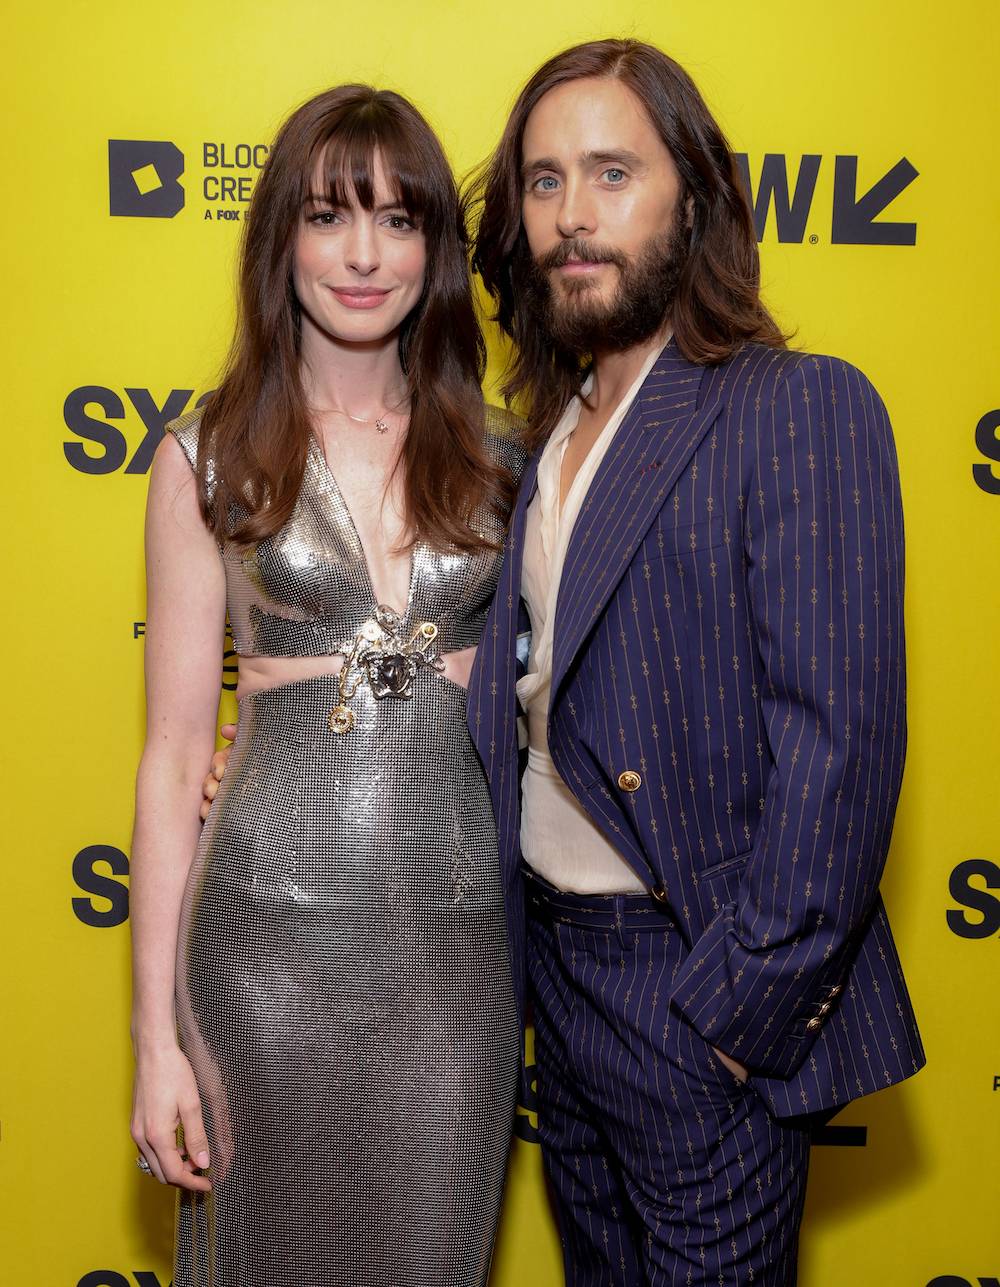 Anne Hathaway i Jared Leto (Fot. Getty Images)